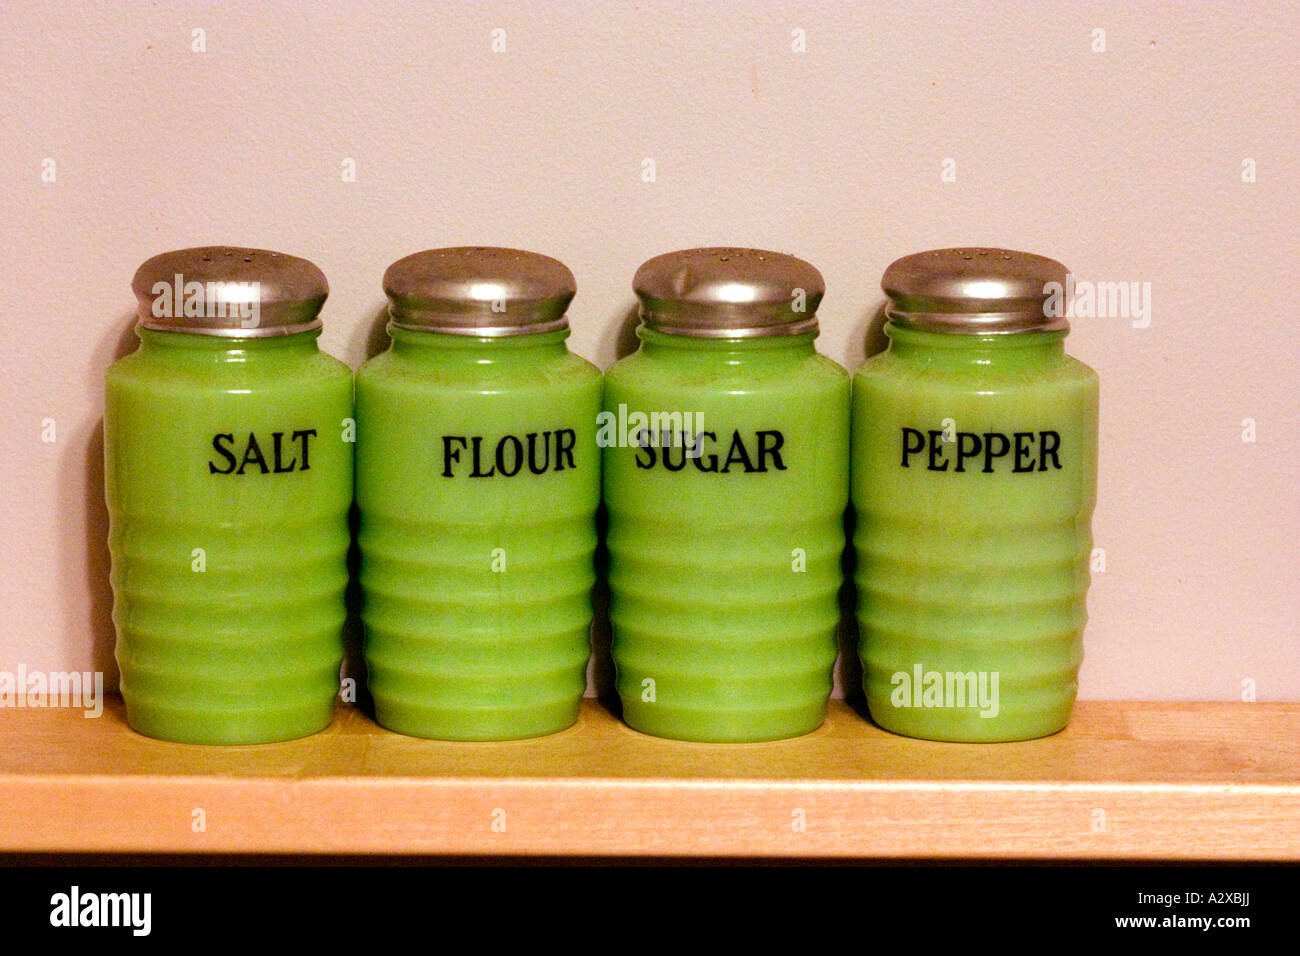 https://c8.alamy.com/comp/A2XBJJ/lime-green-antique-salt-and-pepper-shakers-on-kitchen-shelf-downers-A2XBJJ.jpg